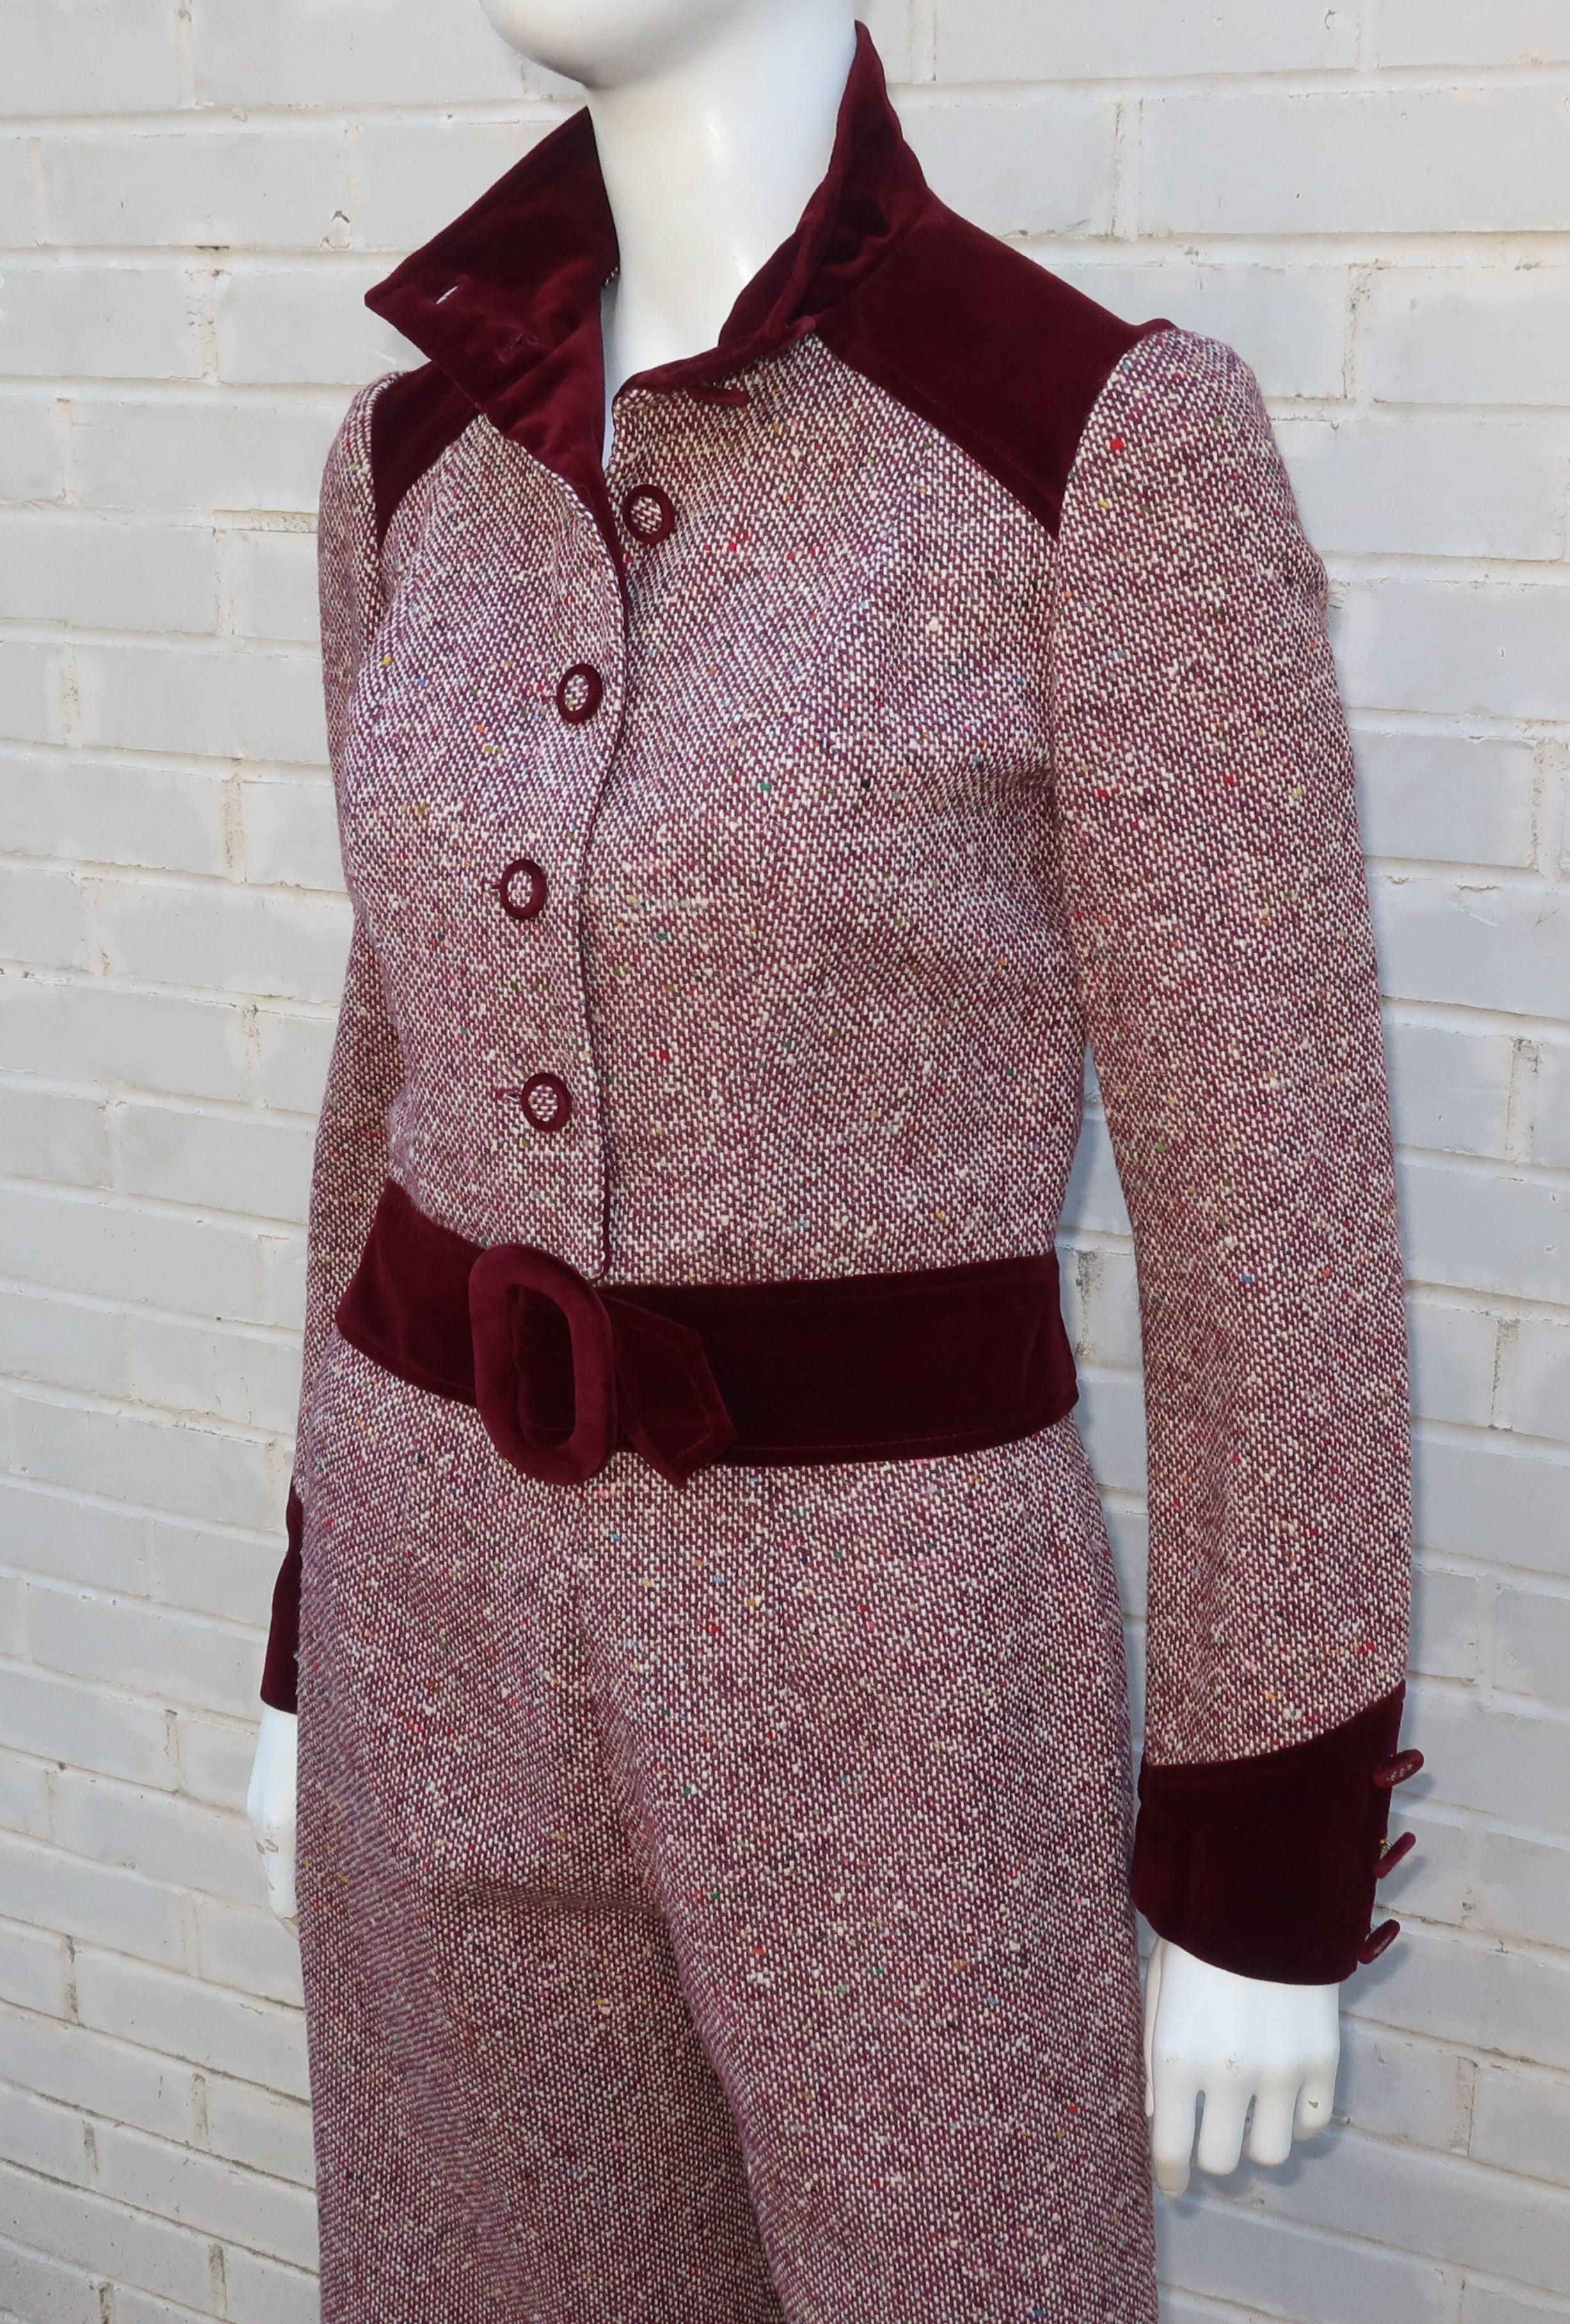 Mod C.1970 Young Victorian Ruby Red Velvet & Wool Tweed Jacket Pant Suit 3